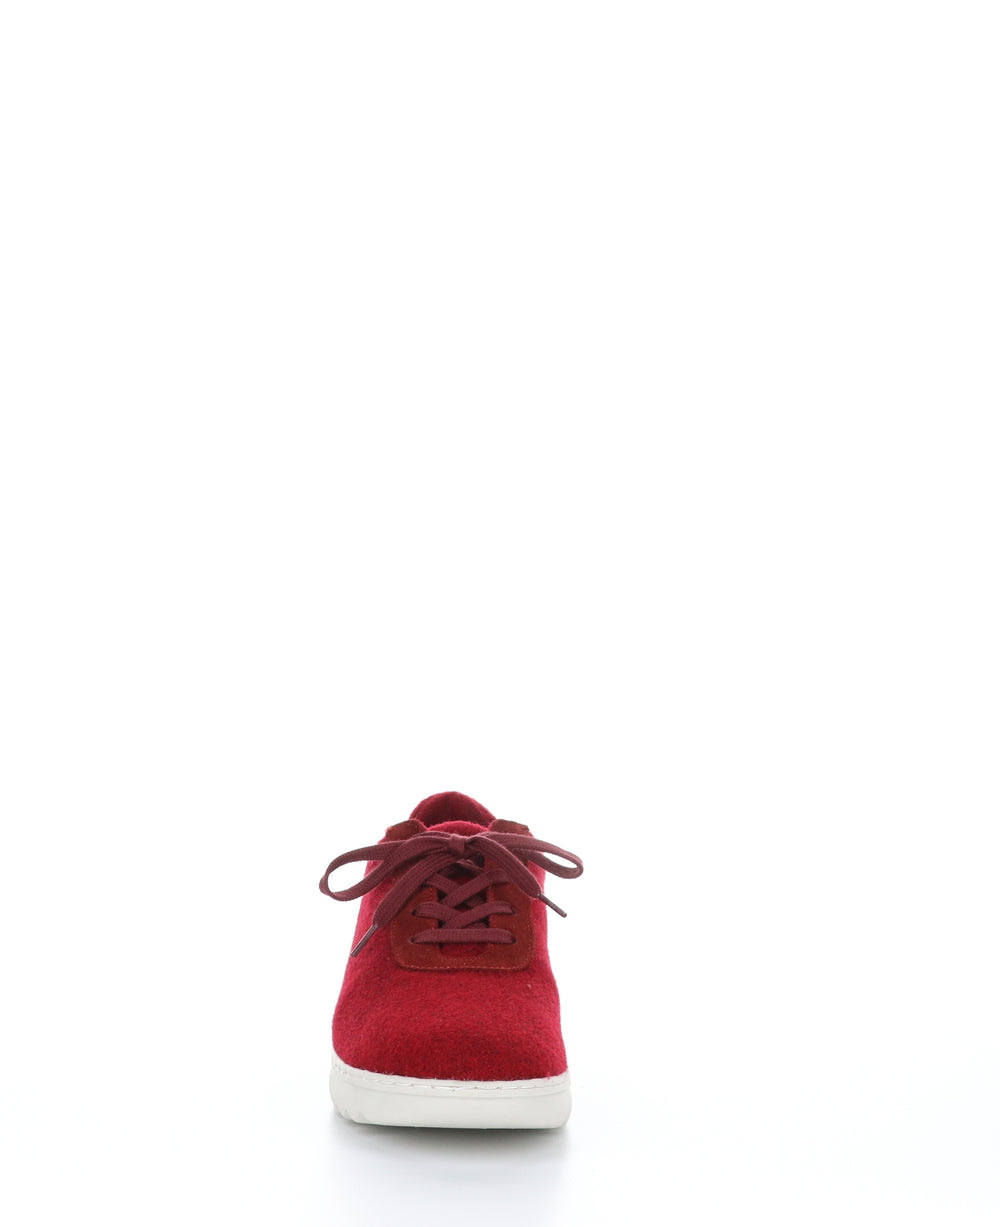 ELRA670SOF Red Round Toe Shoes